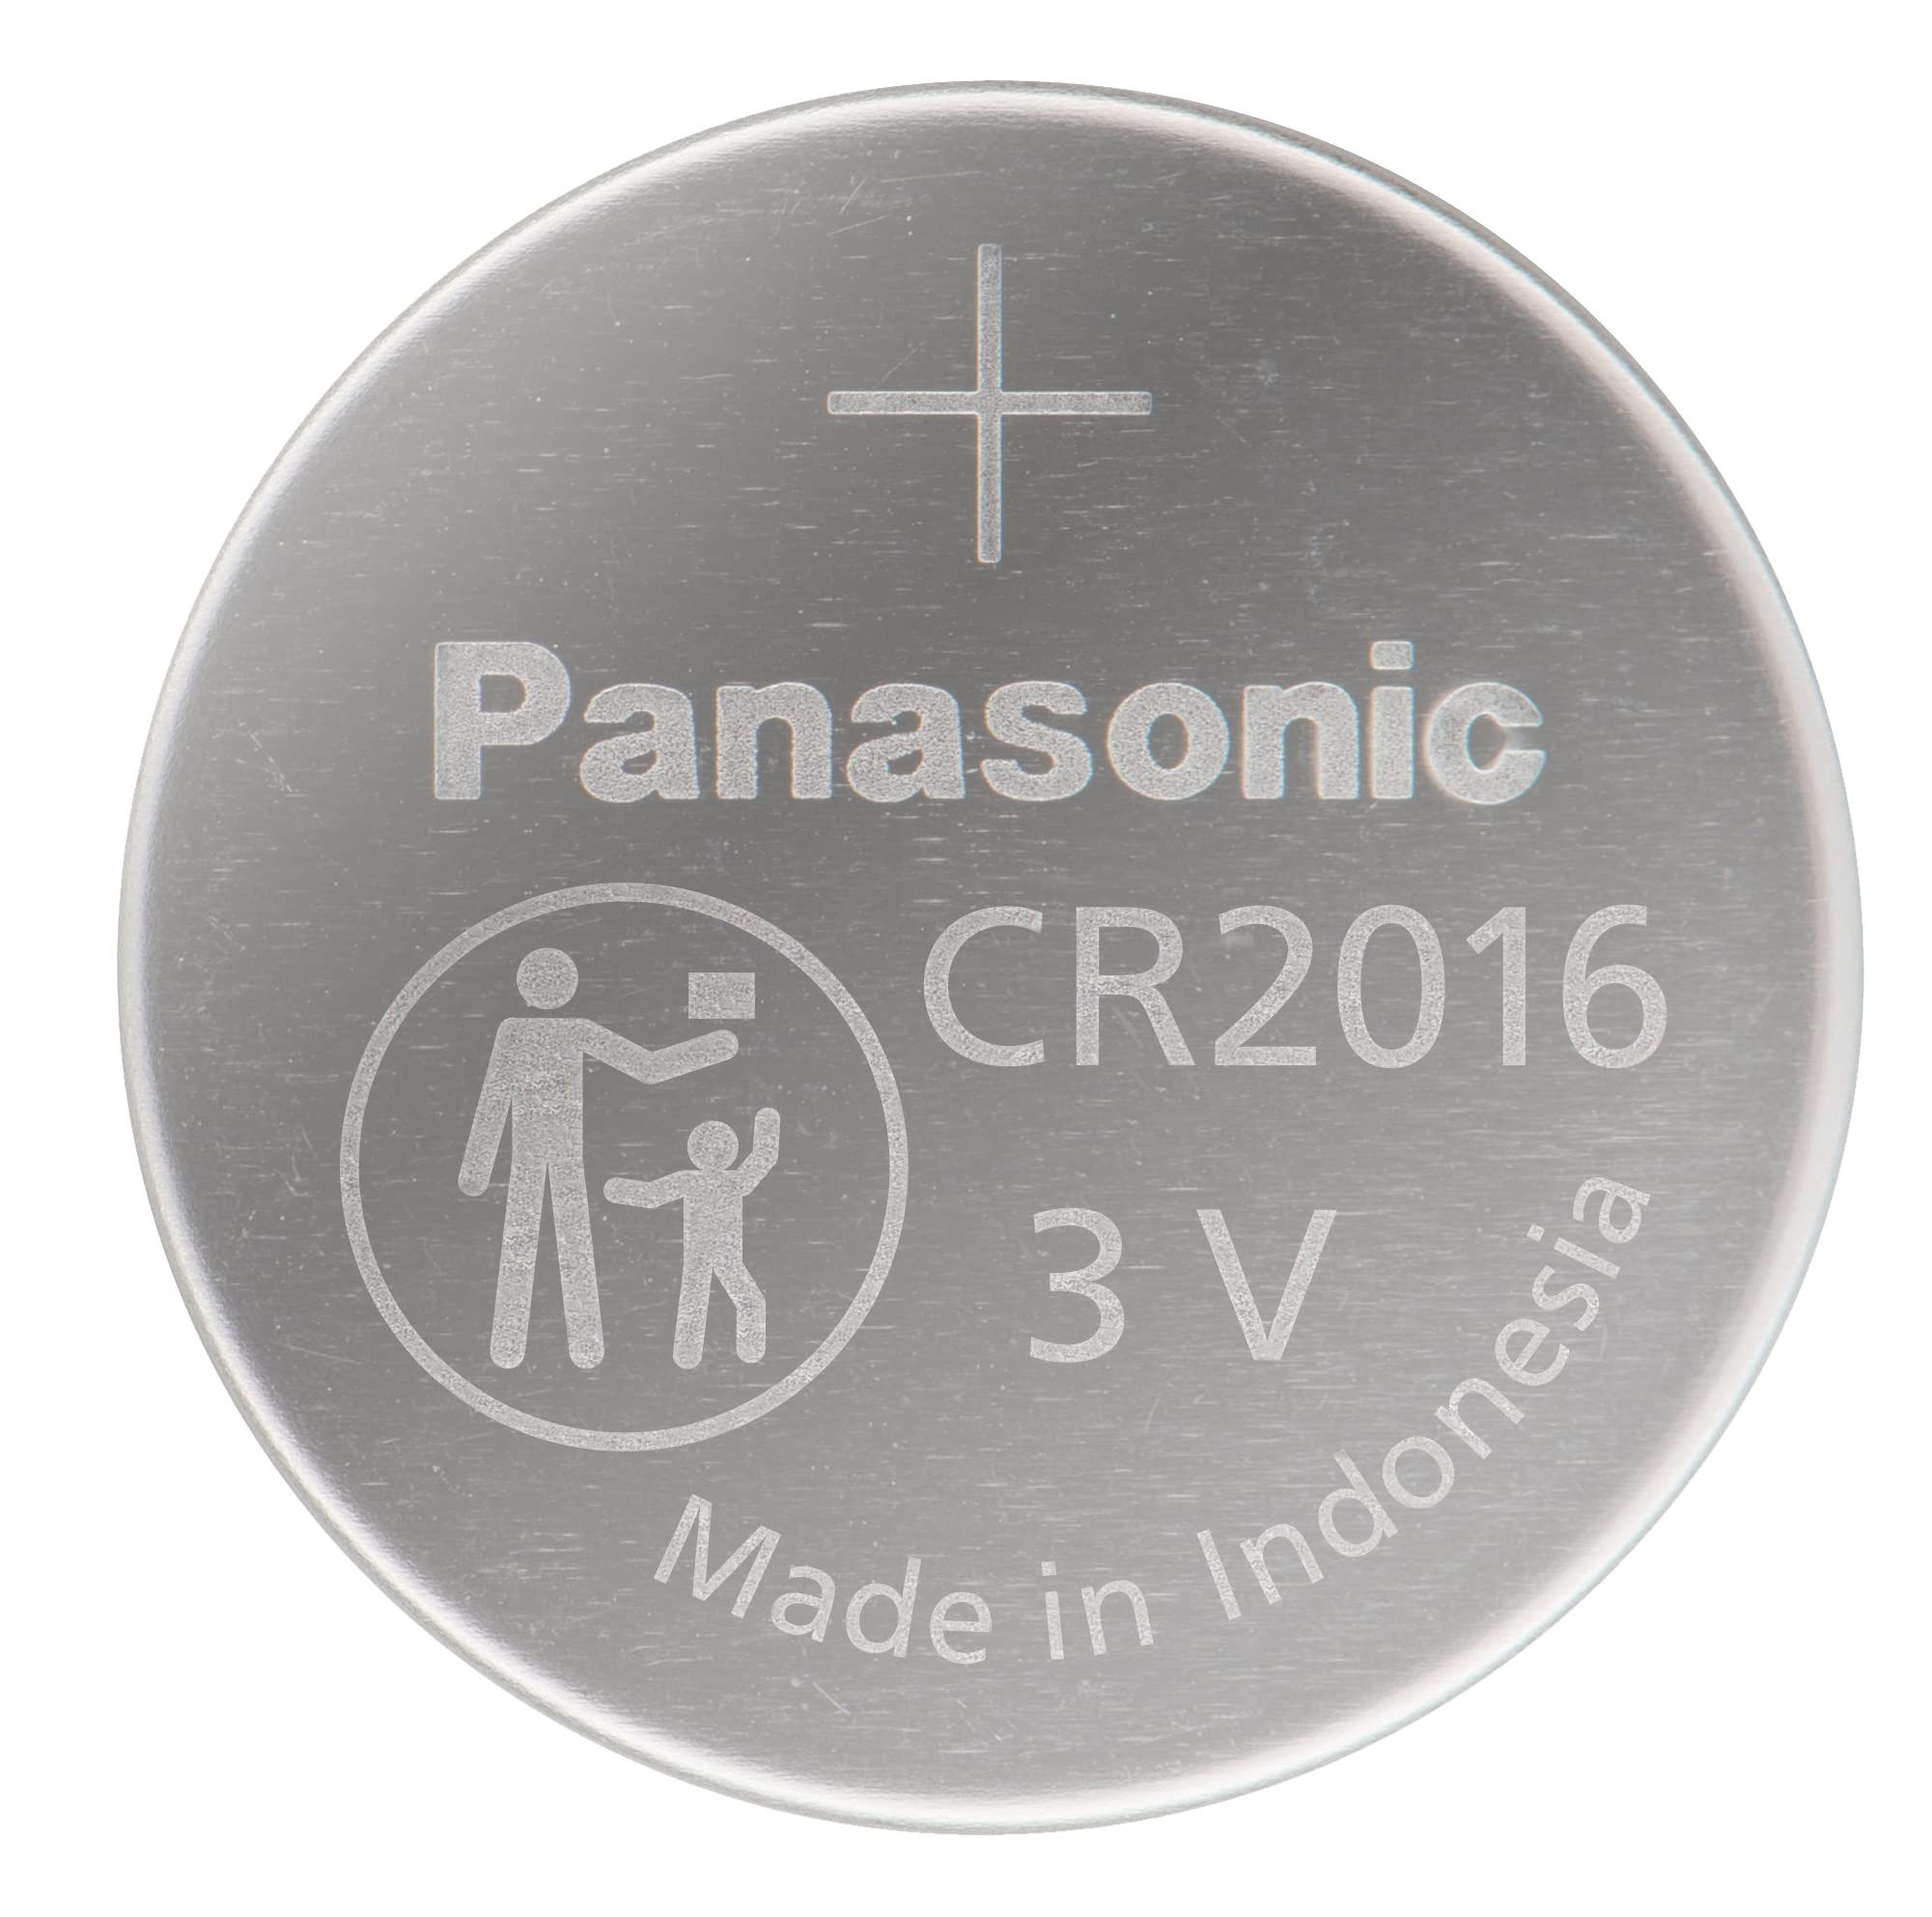 Panasonic CR2016 3.0 Volt Long Lasting Lithium Coin Cell Batteries in Child Resistant, Standards Based Packaging, 2-Battery Pack